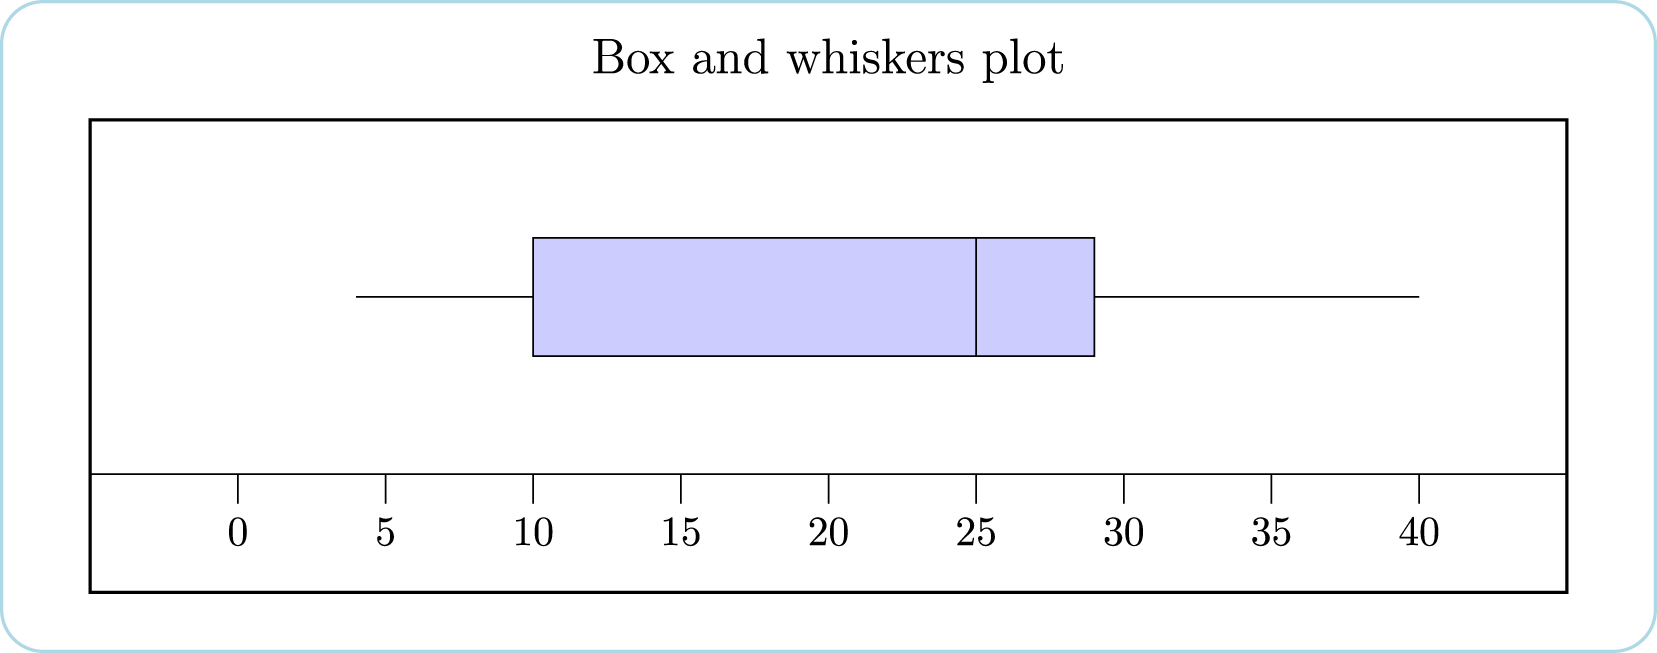 Box and whiskers plot. The left whisker is from 4 to 10. The box is between 10 and 29. The middle line is at 25 and the right whisker runs from 29 to 40